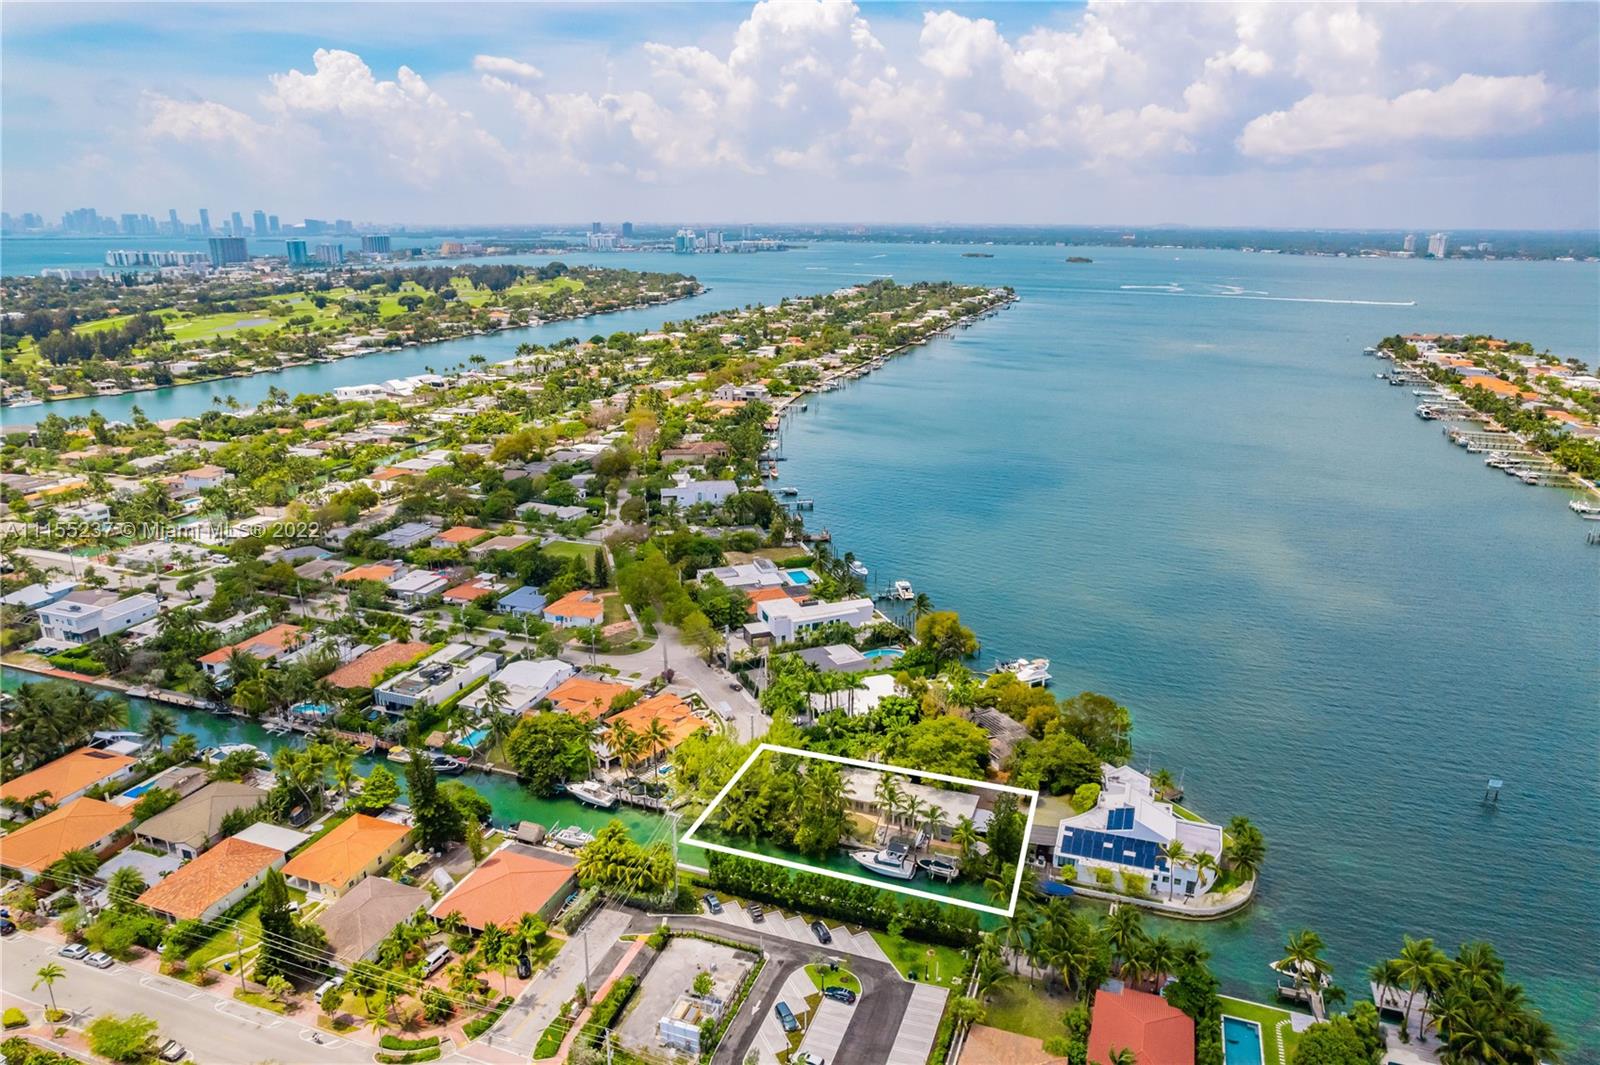 Unique opportunity to own a one of a kind home right on the magical Biscayne Bay in Miami Beach. This amazing renovated home, the inspiration of a designer and artist with the utmost care to detail. Great character in every corner inside and out. Sitting on 162 feet of water at the end of a channel, 30 feet from the open bay, it is ideal for a boater, complete with boat lift and a large dock. Biscayne Point is a gated island close to all the amenities of Miami Beach, yet secluded in it's own cul-de-sac shared with only two other homes. It has two bedrooms and a large artist studio, easily convertible to what your heart desires. This one will go quickly, so come see it for yourself. Biscayne Point is a gated Island.